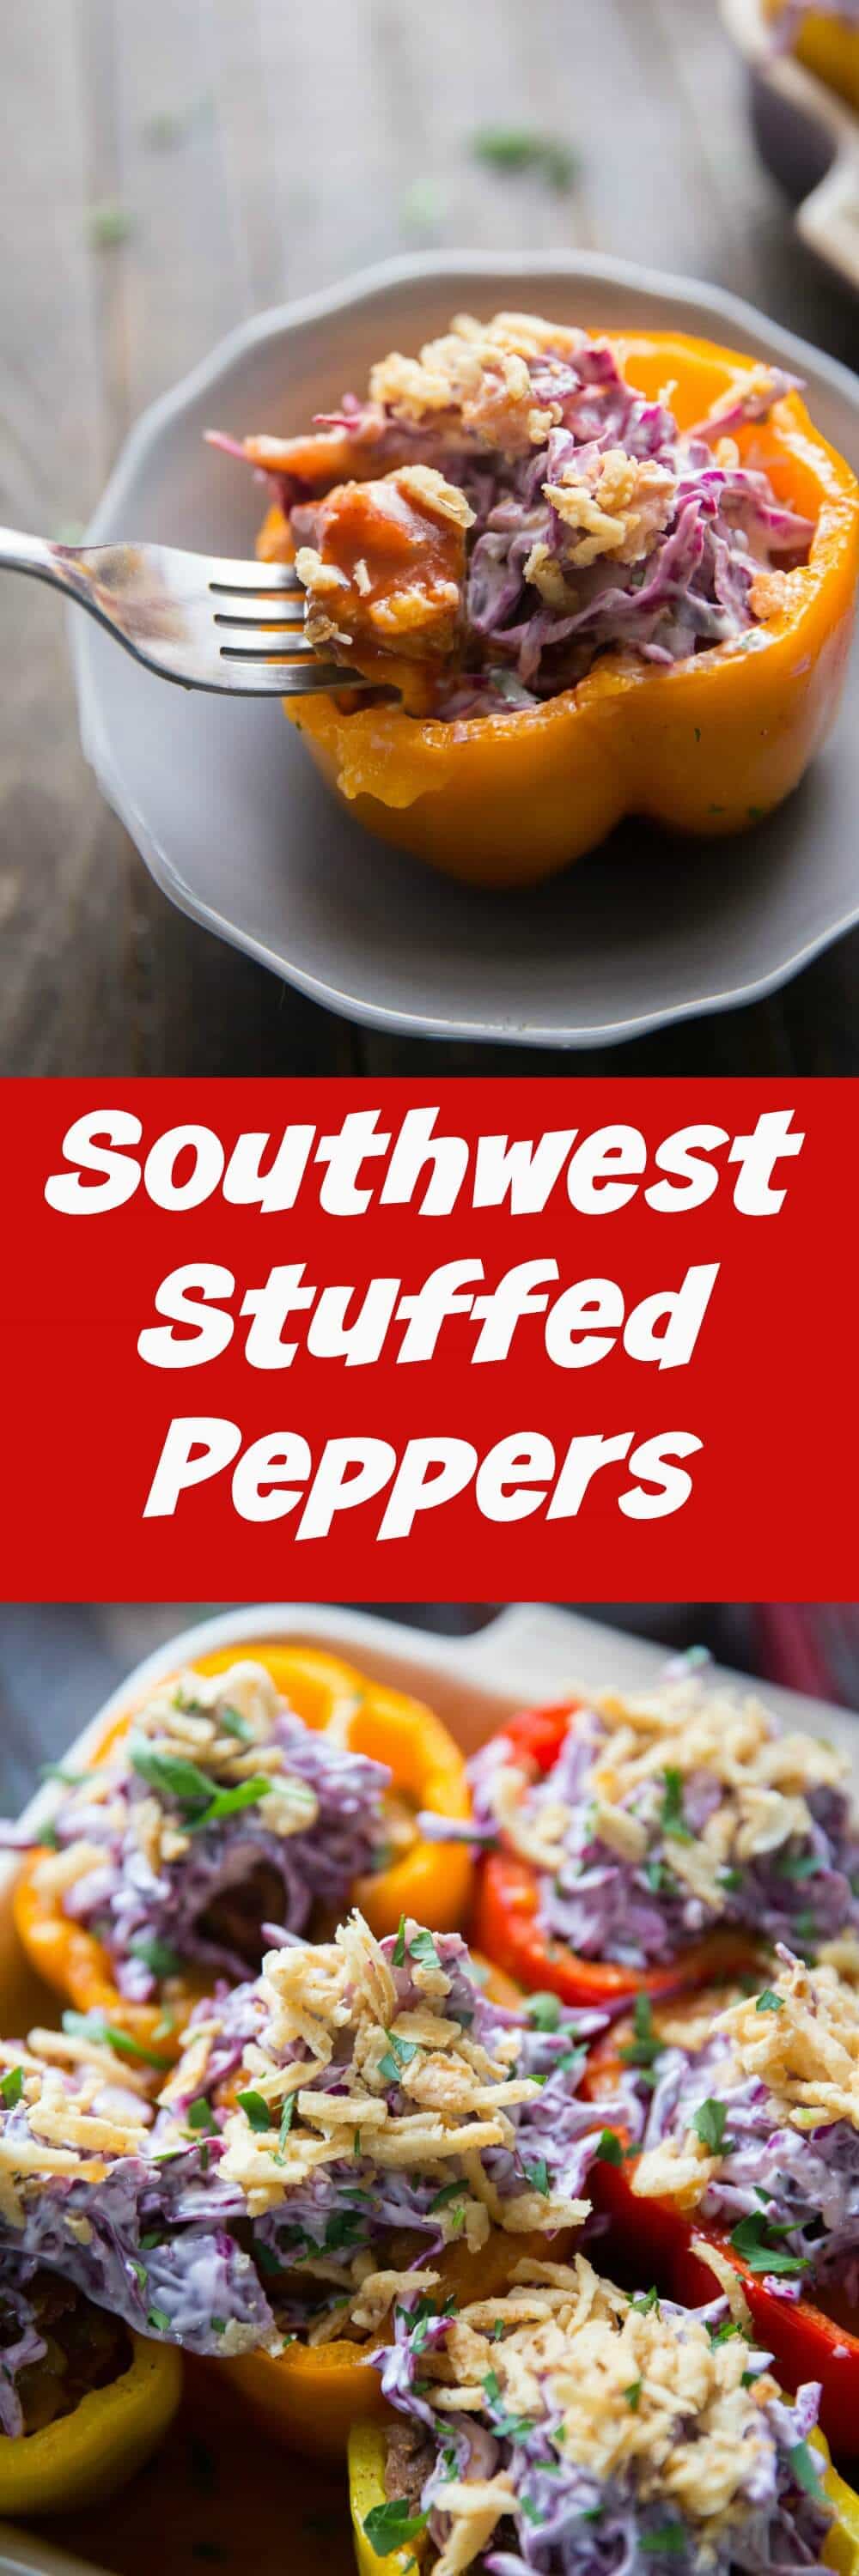 Forget ordinary stuffed peppers when you can have these Southwest Stuffed peppers instead! These peppers are filled with BBQ brisket and topped with slaw!